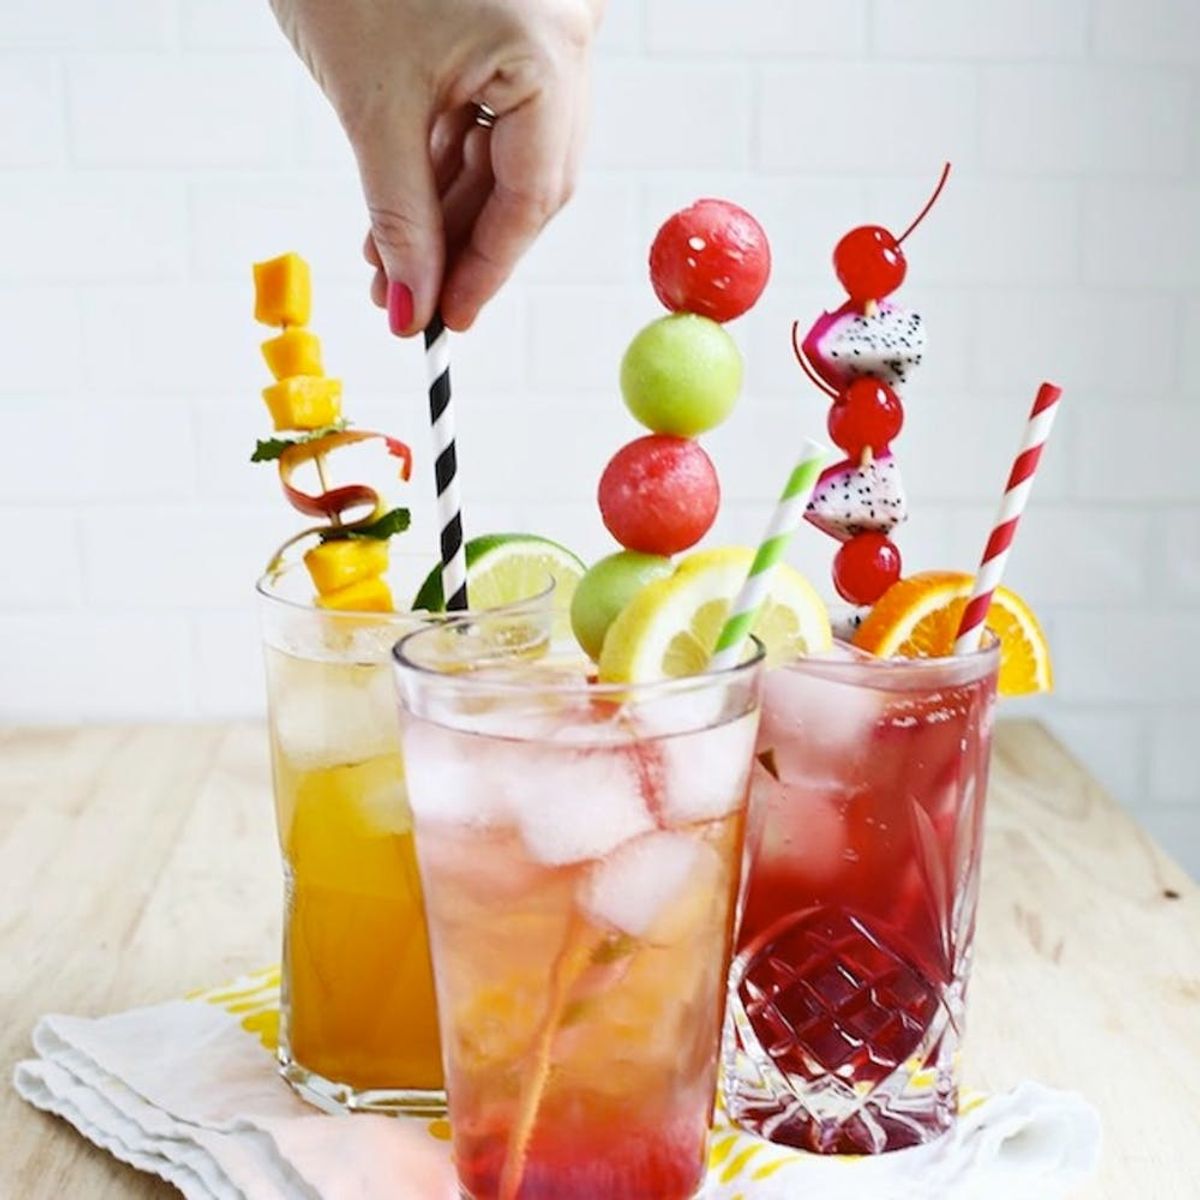 15 Sparkling Drinks to Replace Your Fave Sugary Sodas